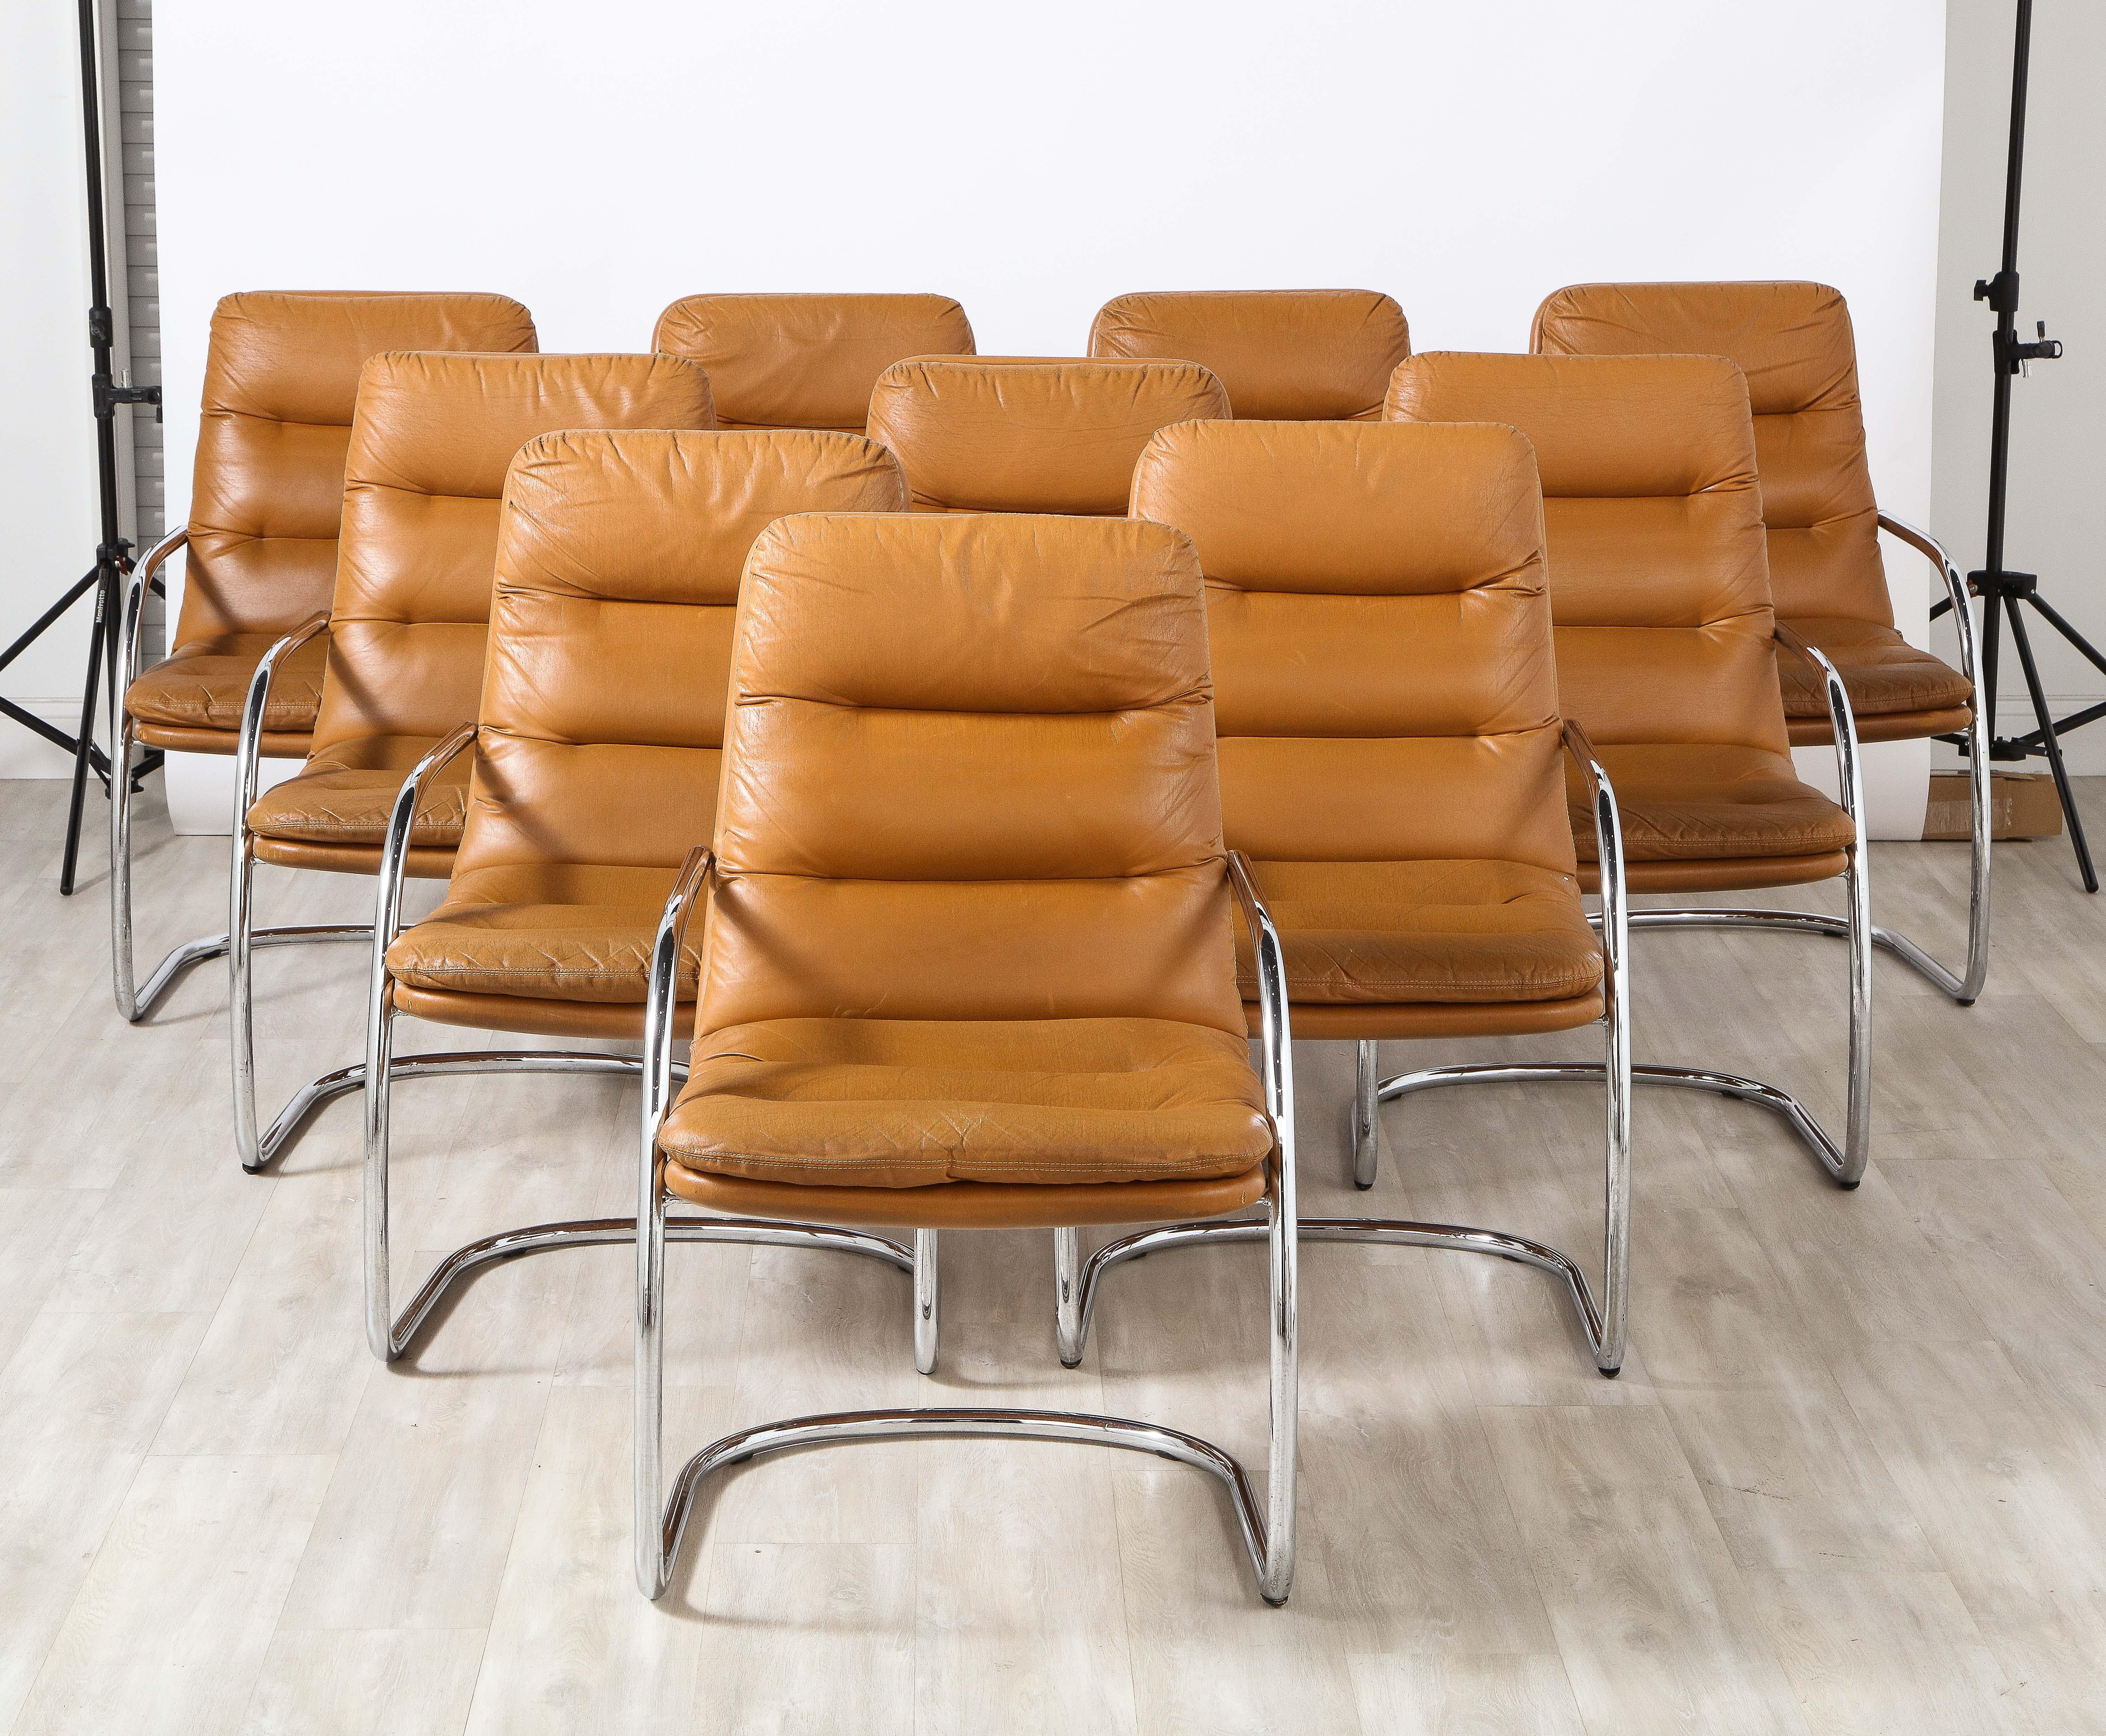 A set of ten armchairs in beautiful caramel leather with polished chrome frames. The seats and backs are covered completely with the rich and supple caramel colored Italian leather and are attached to graceful polished steel tubular frames. Perfect